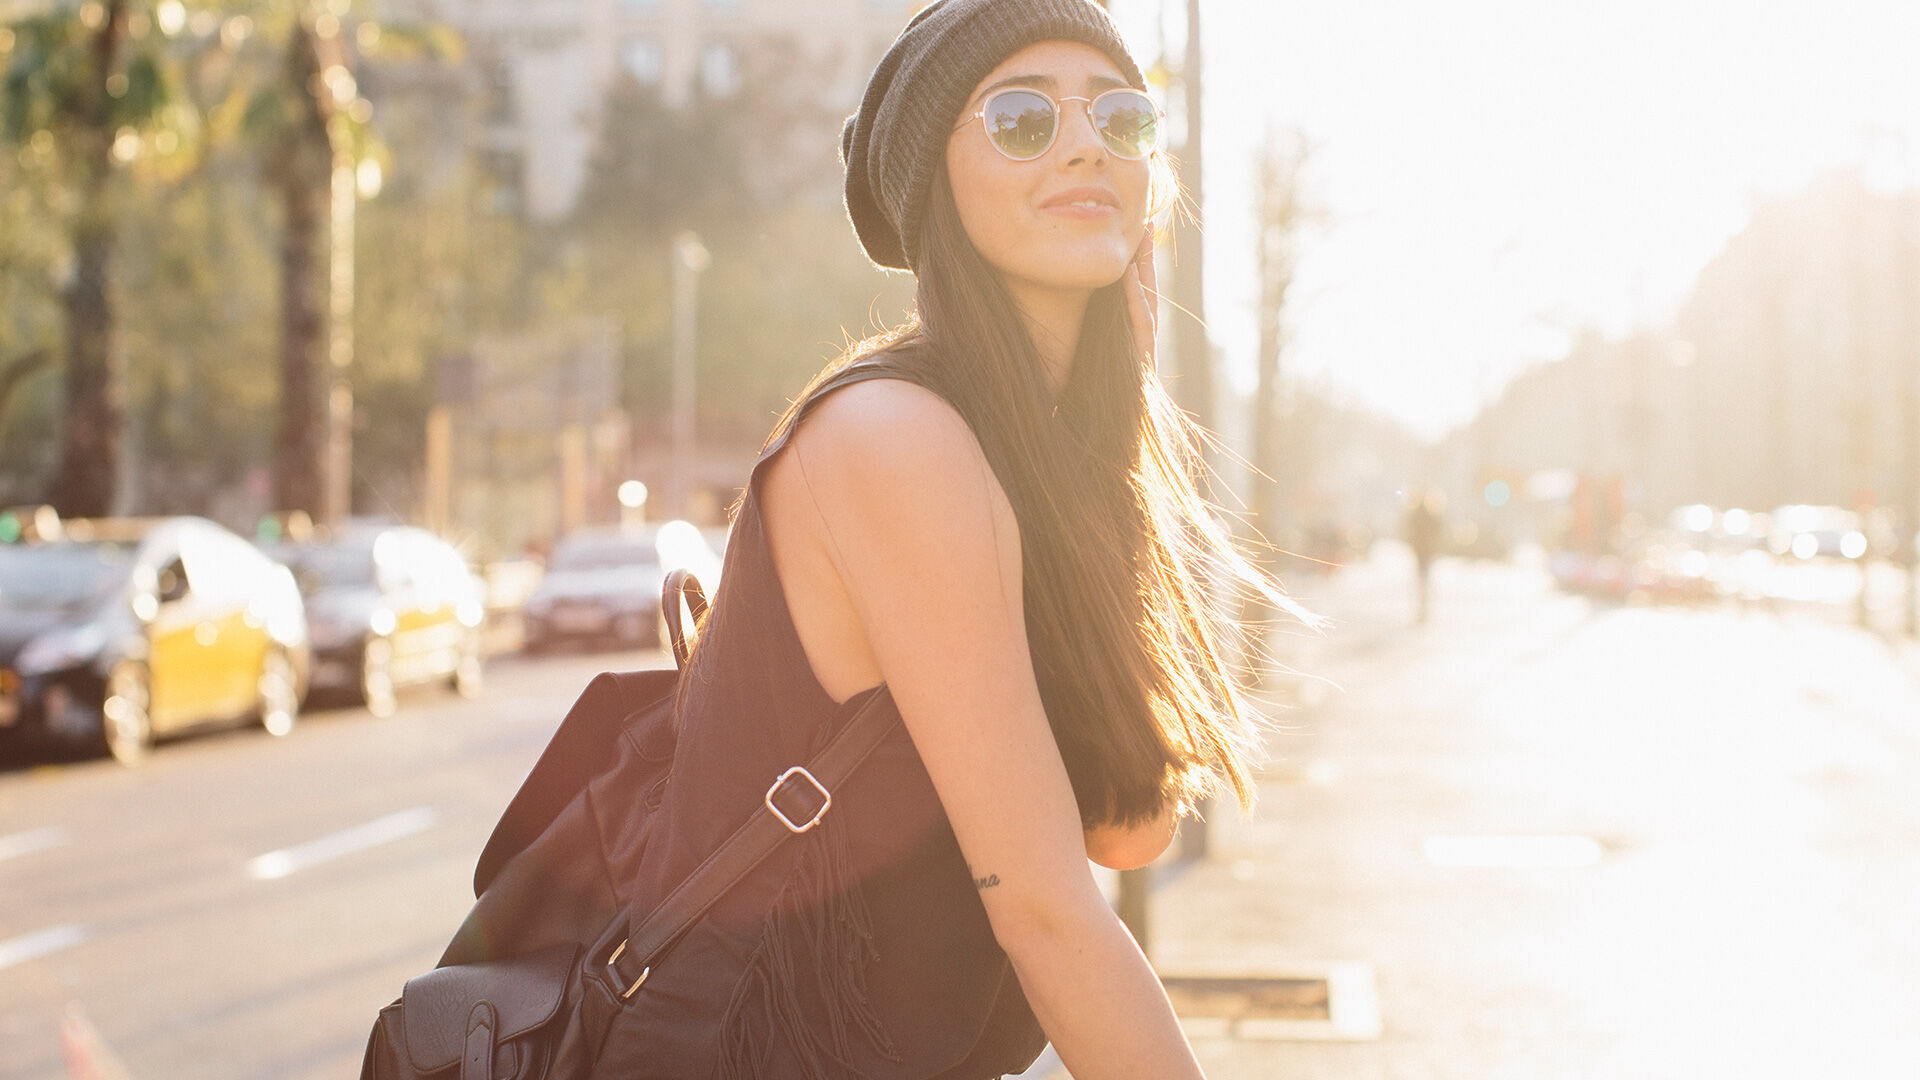 A stylish woman with sunglasses and beanie walks on a sunny city street, radiating a relaxed, modern vibe."